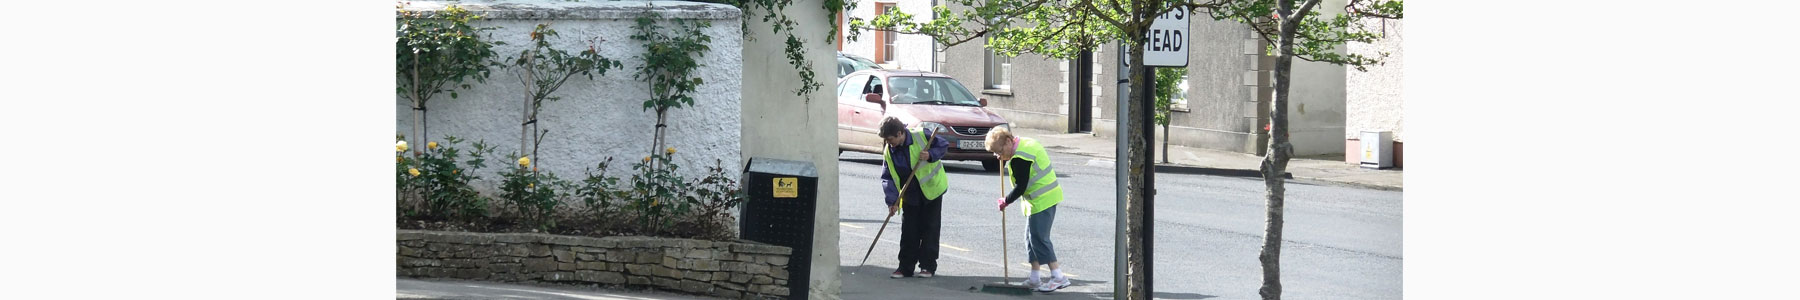 Tidy Towns at Work 2